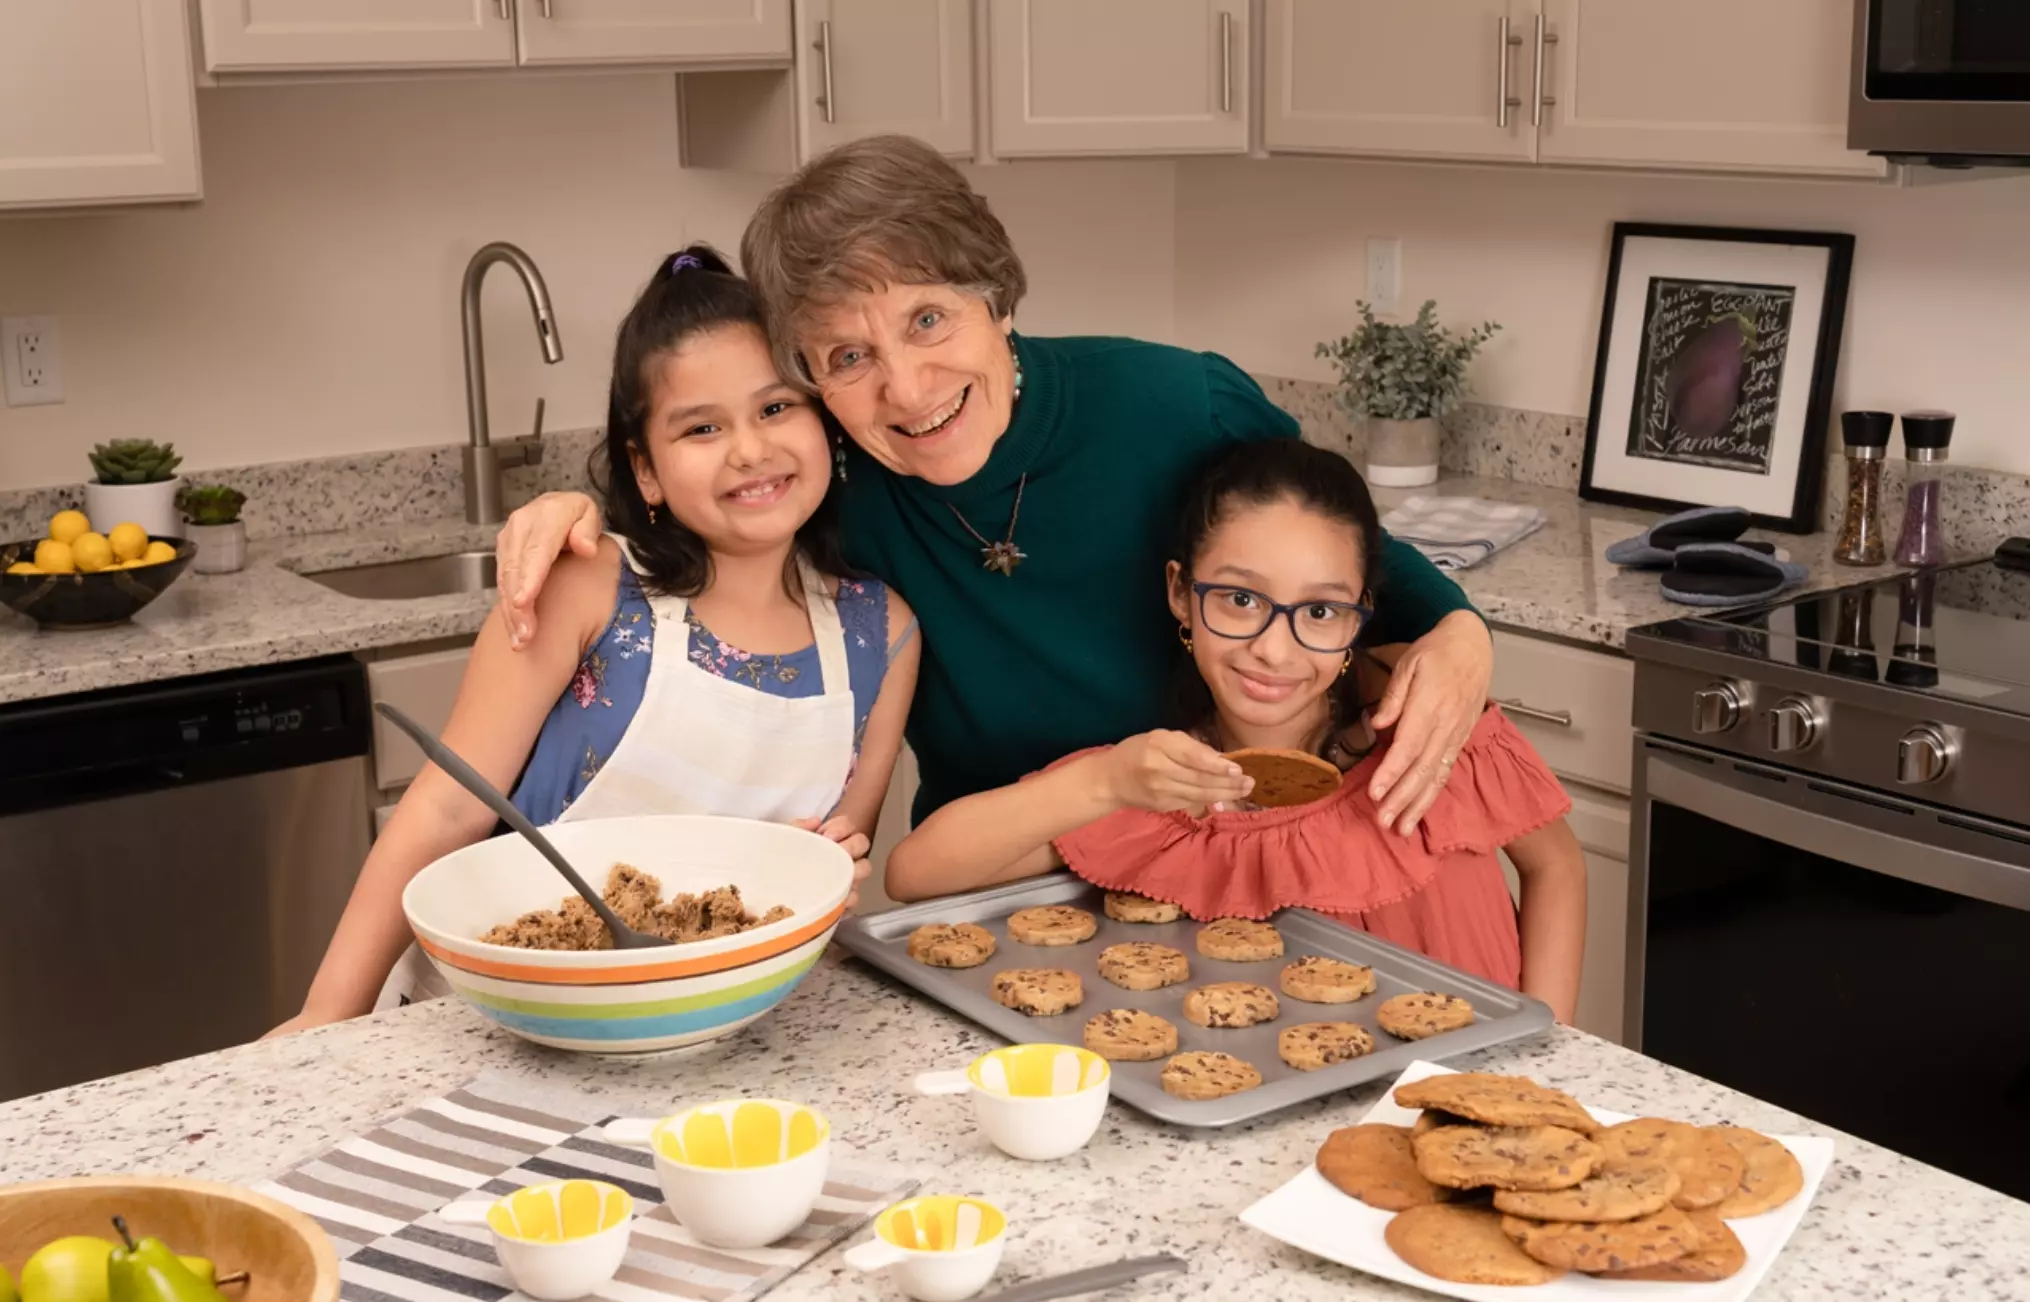 grandma baking cookies with two young girls